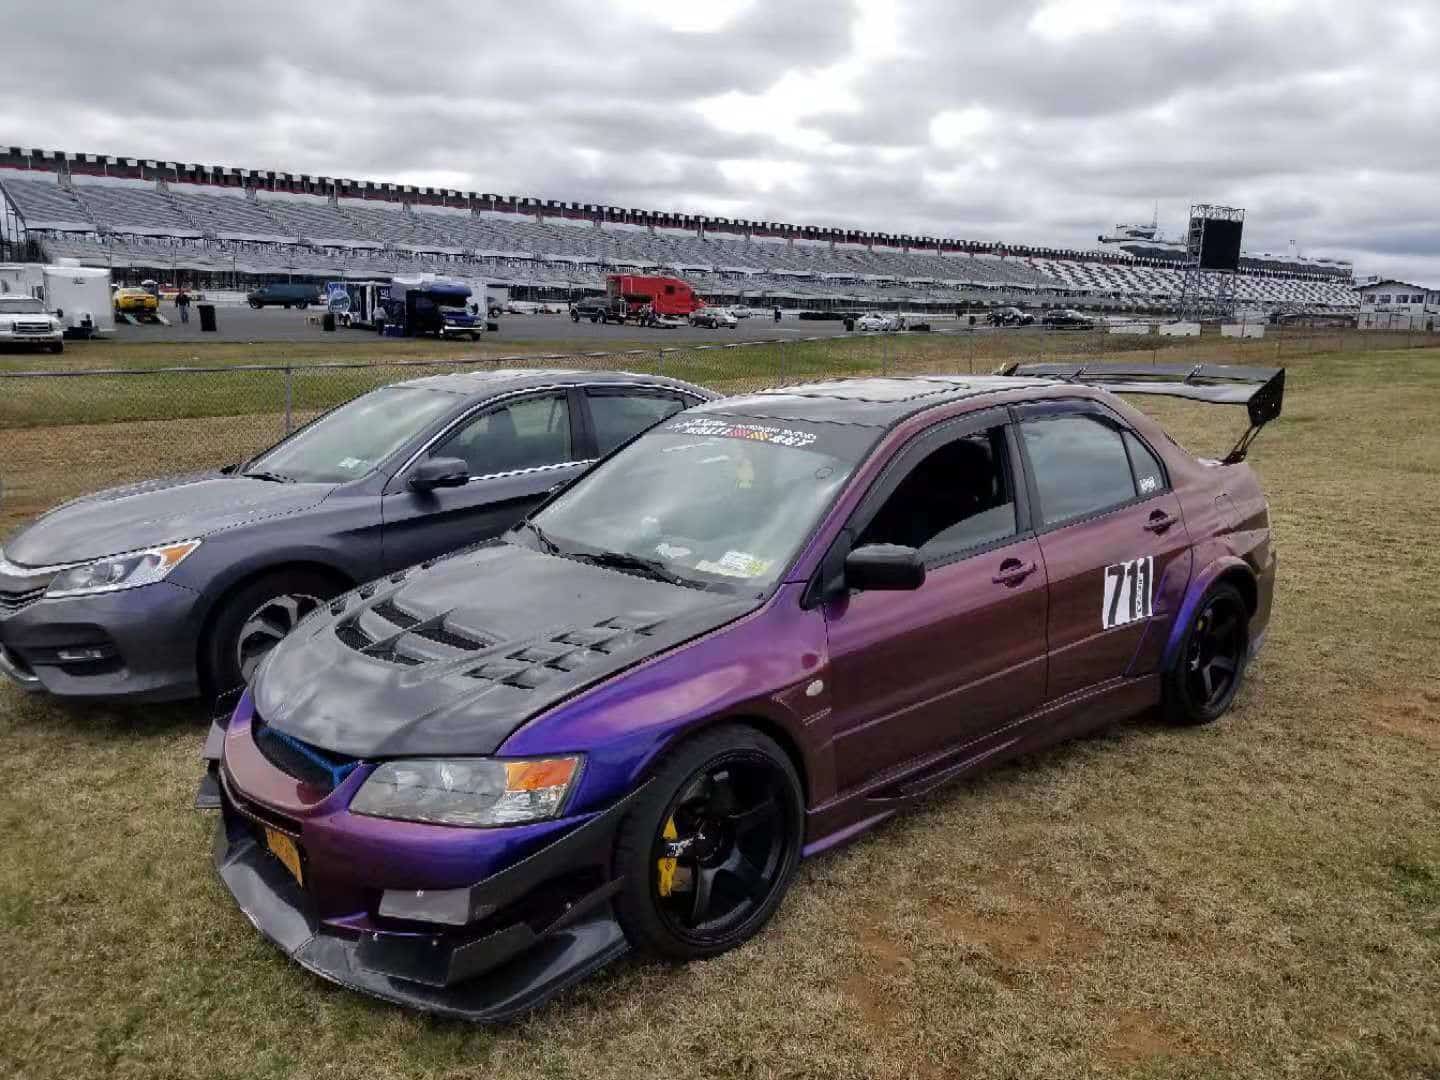 2003 Mitsubishi Lancer Evolution - Part out the car 2005 evo 8 only pick up only (11378) - Brooklyn, NY 11229, United States